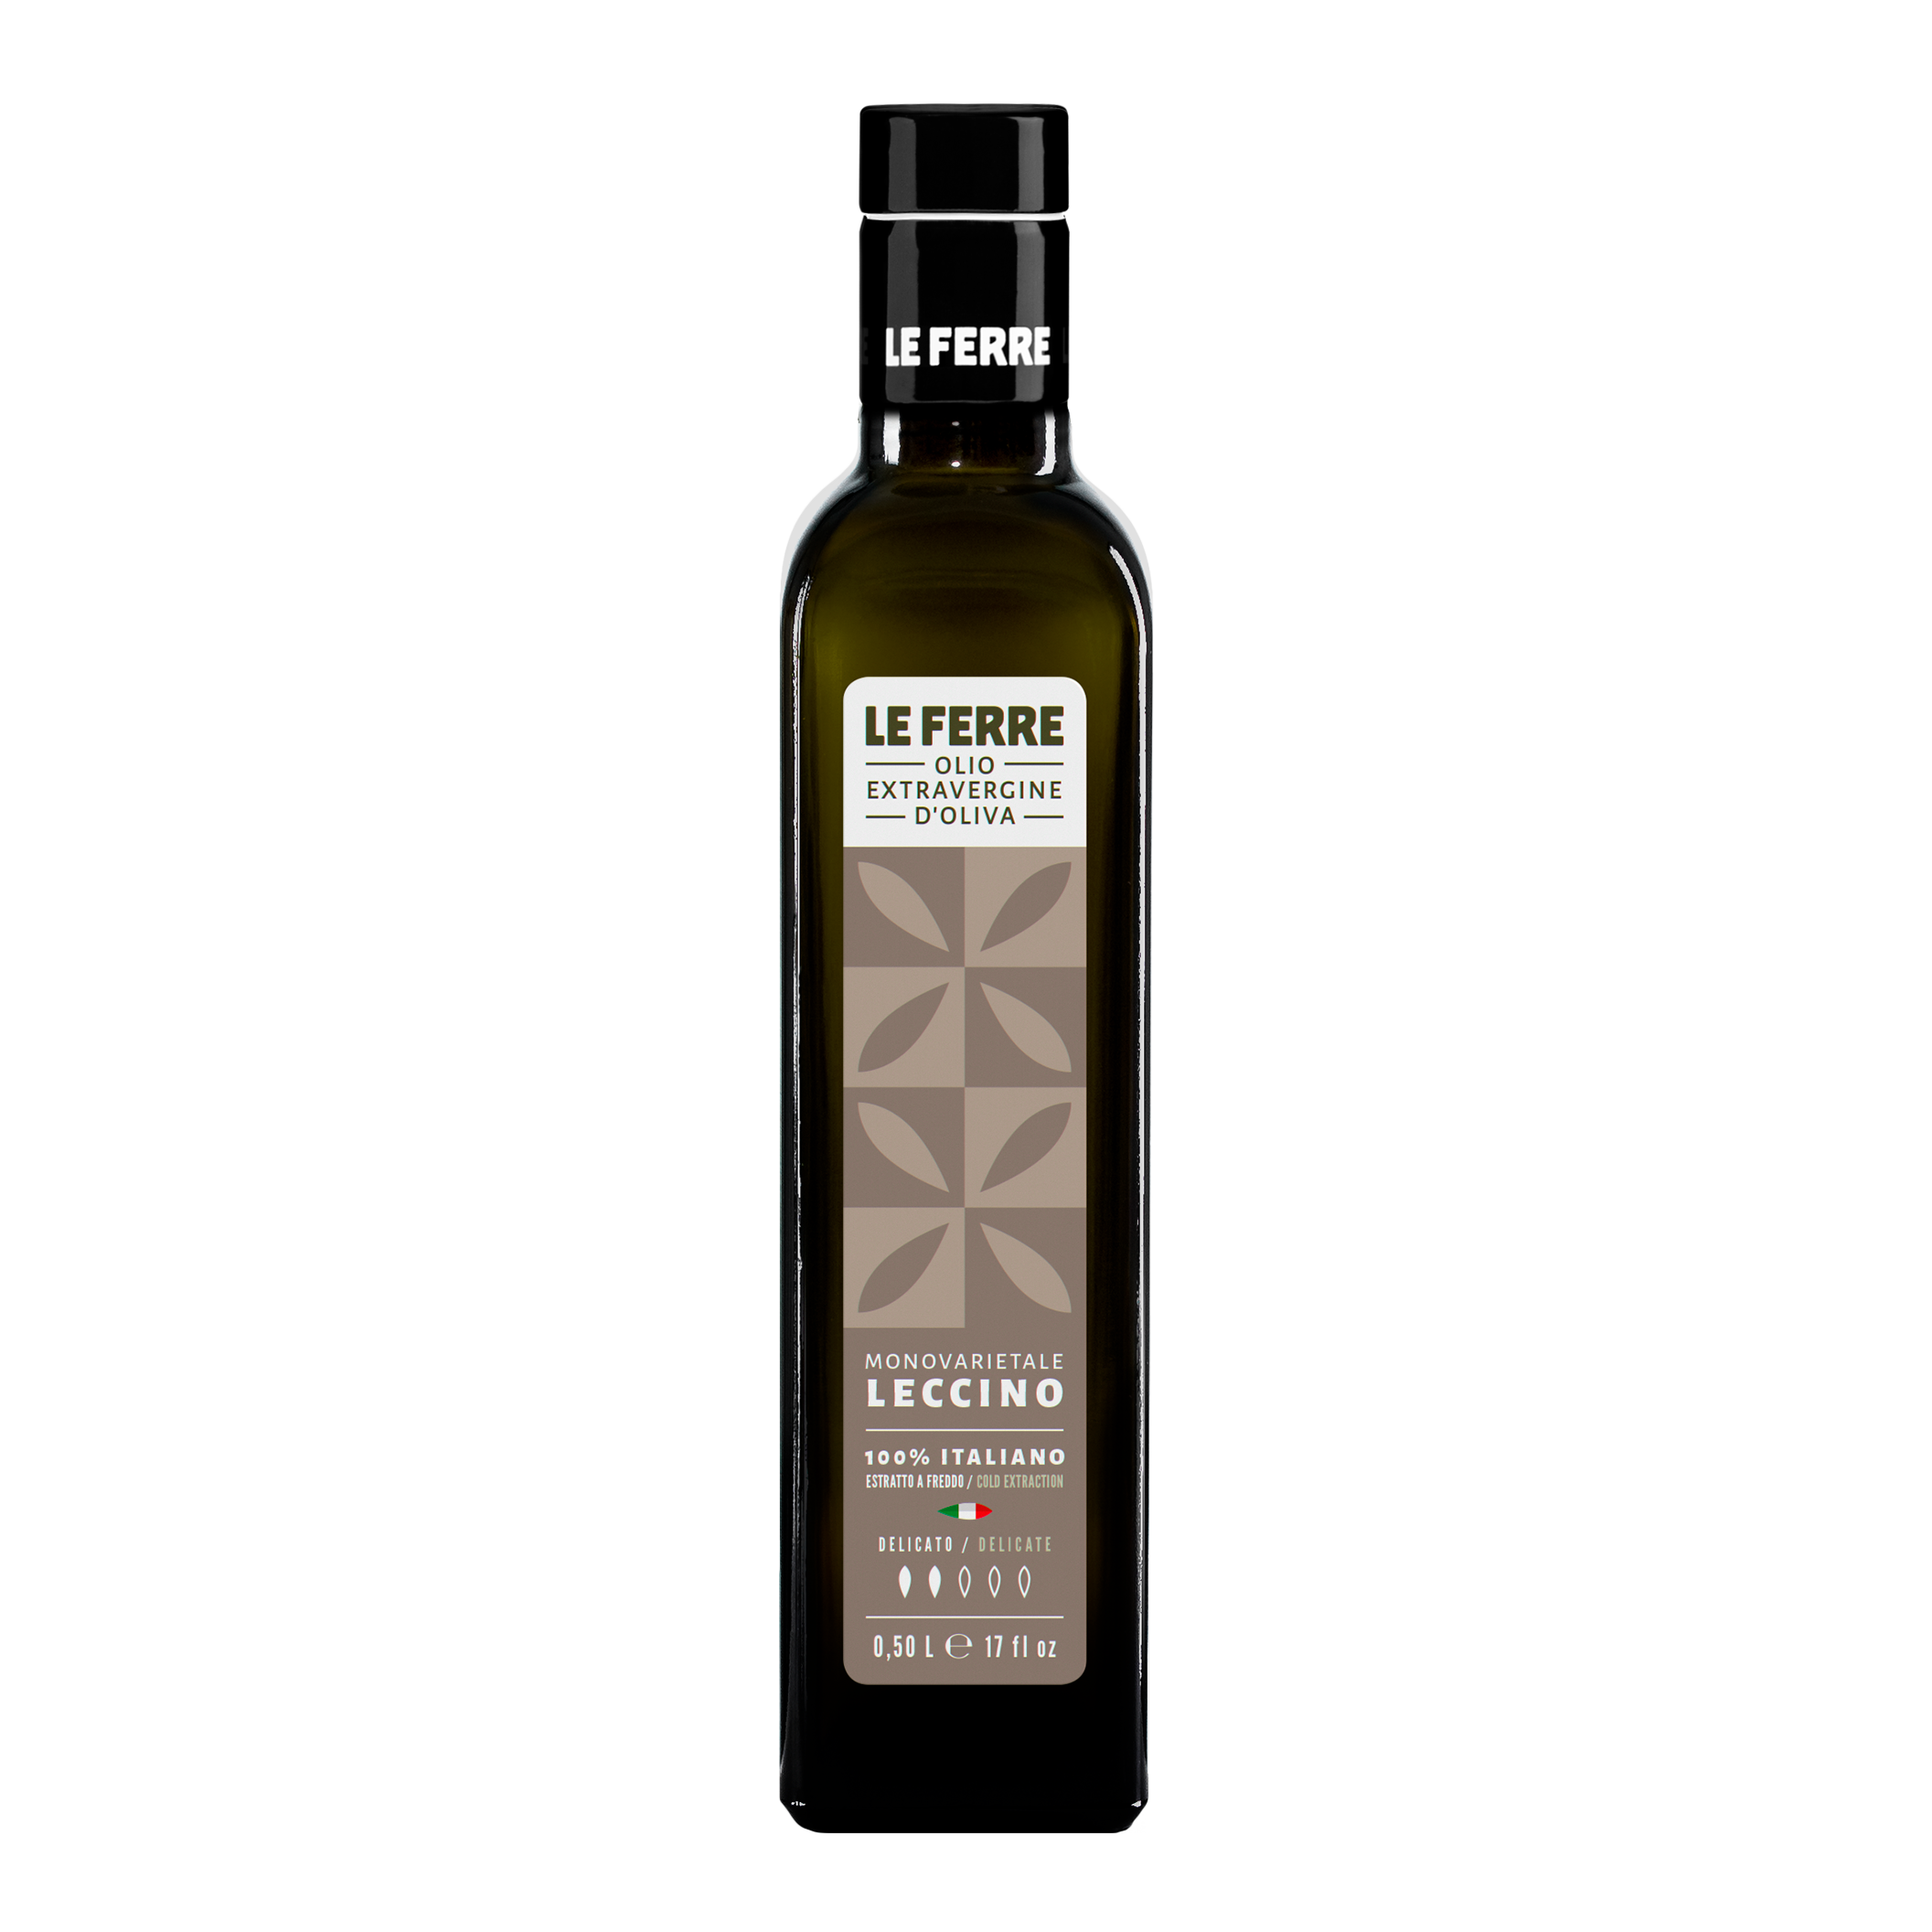 Le Ferre Leccino Extra Virgin Olive Oil 500ml Buy the Best Olive Oils Online